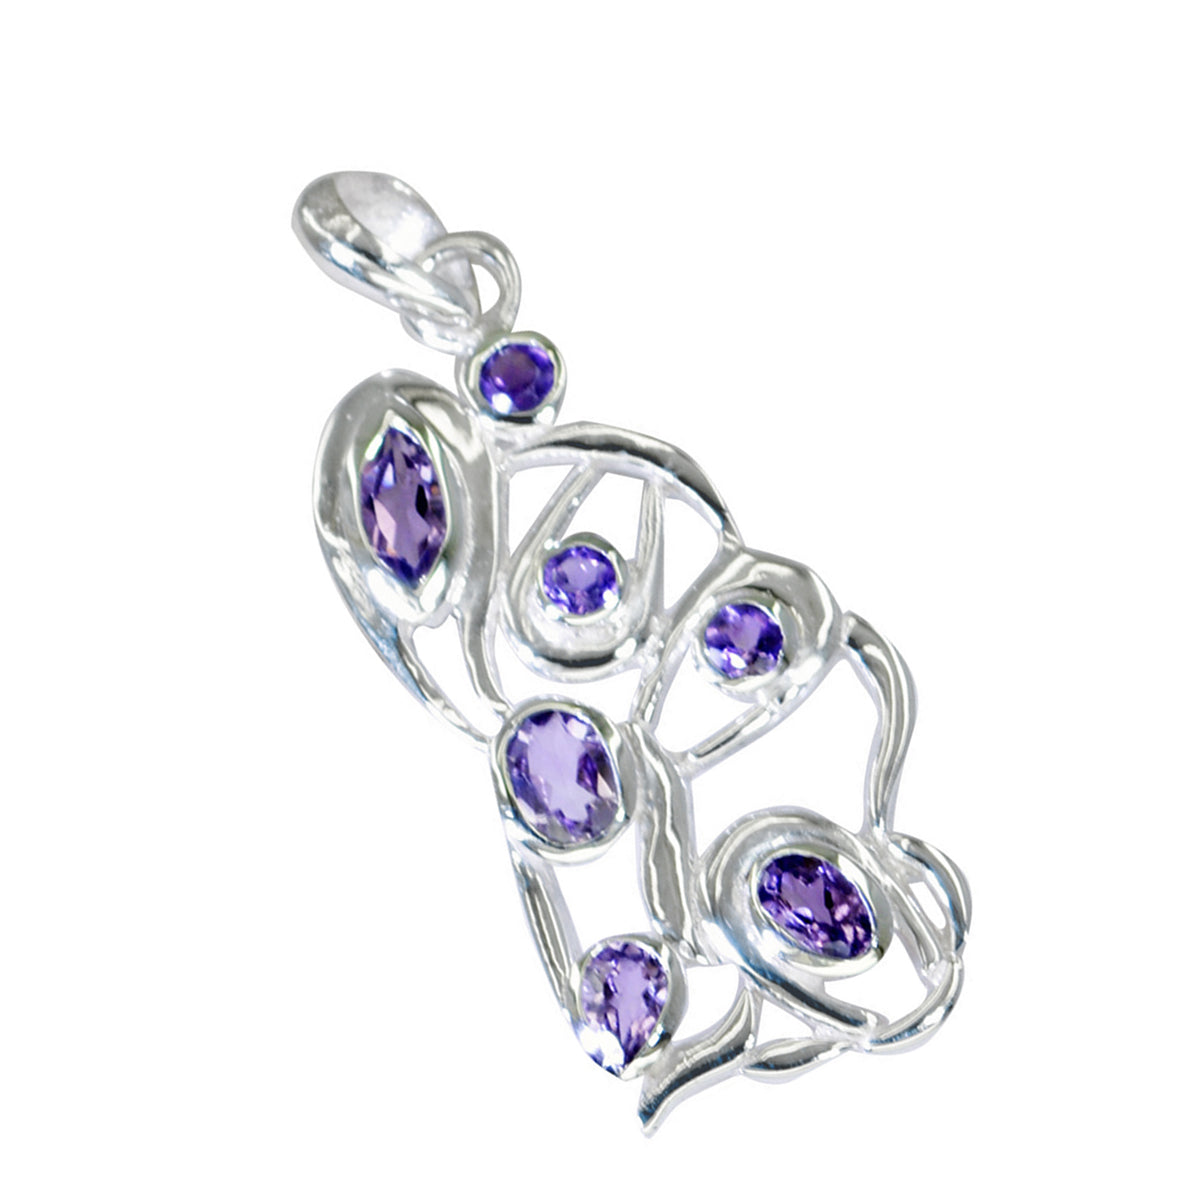 Riyo Exquisite Gems Multi Faceted Purple Amethyst Solid Silver Pendant Gift For Anniversary